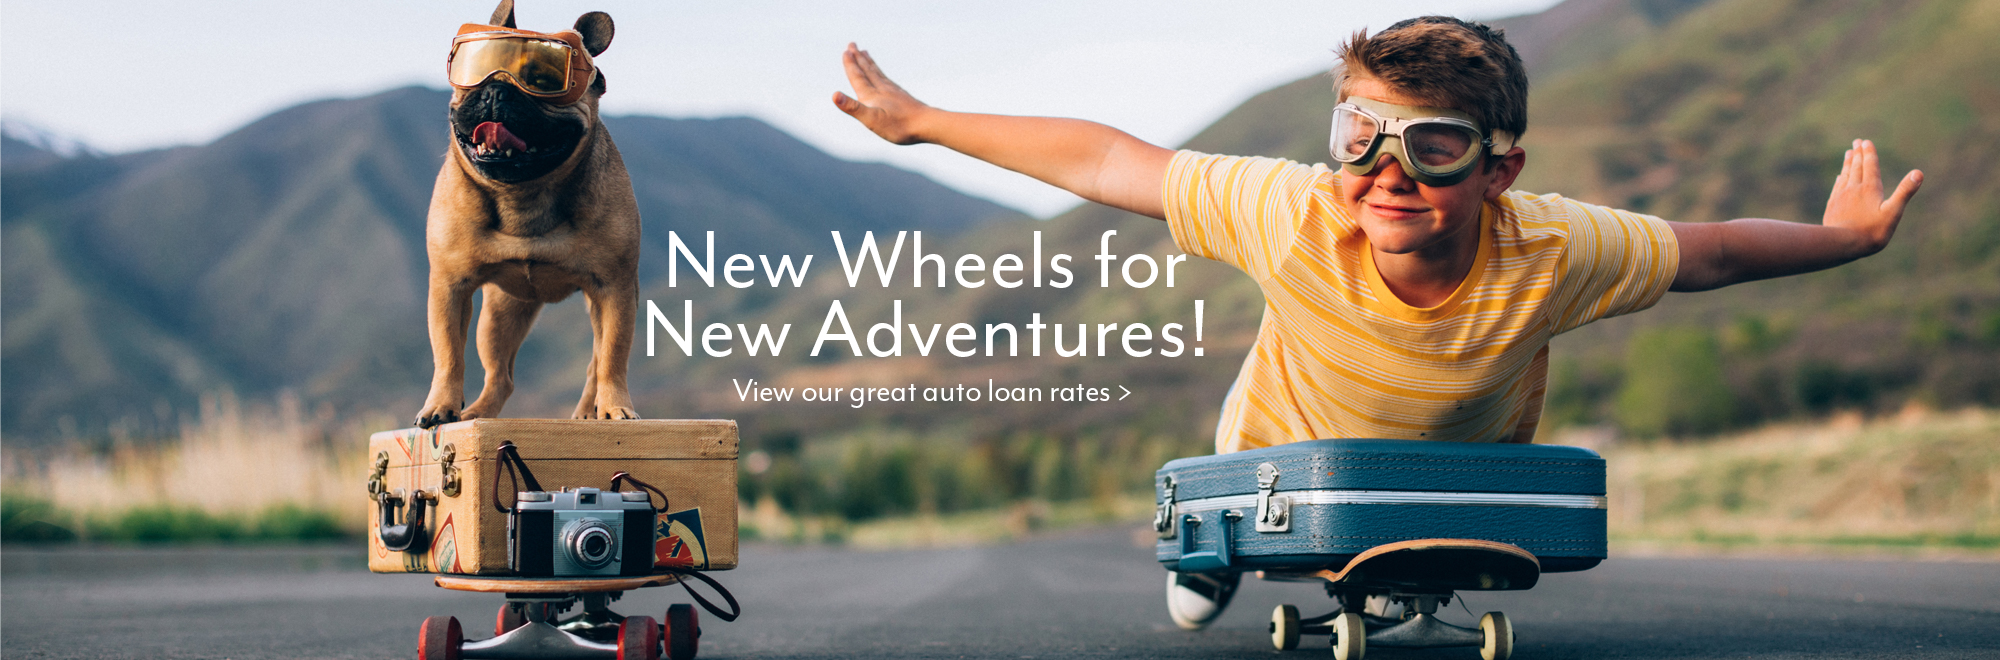 New Wheels for New Adventures. View our great auto loan rates